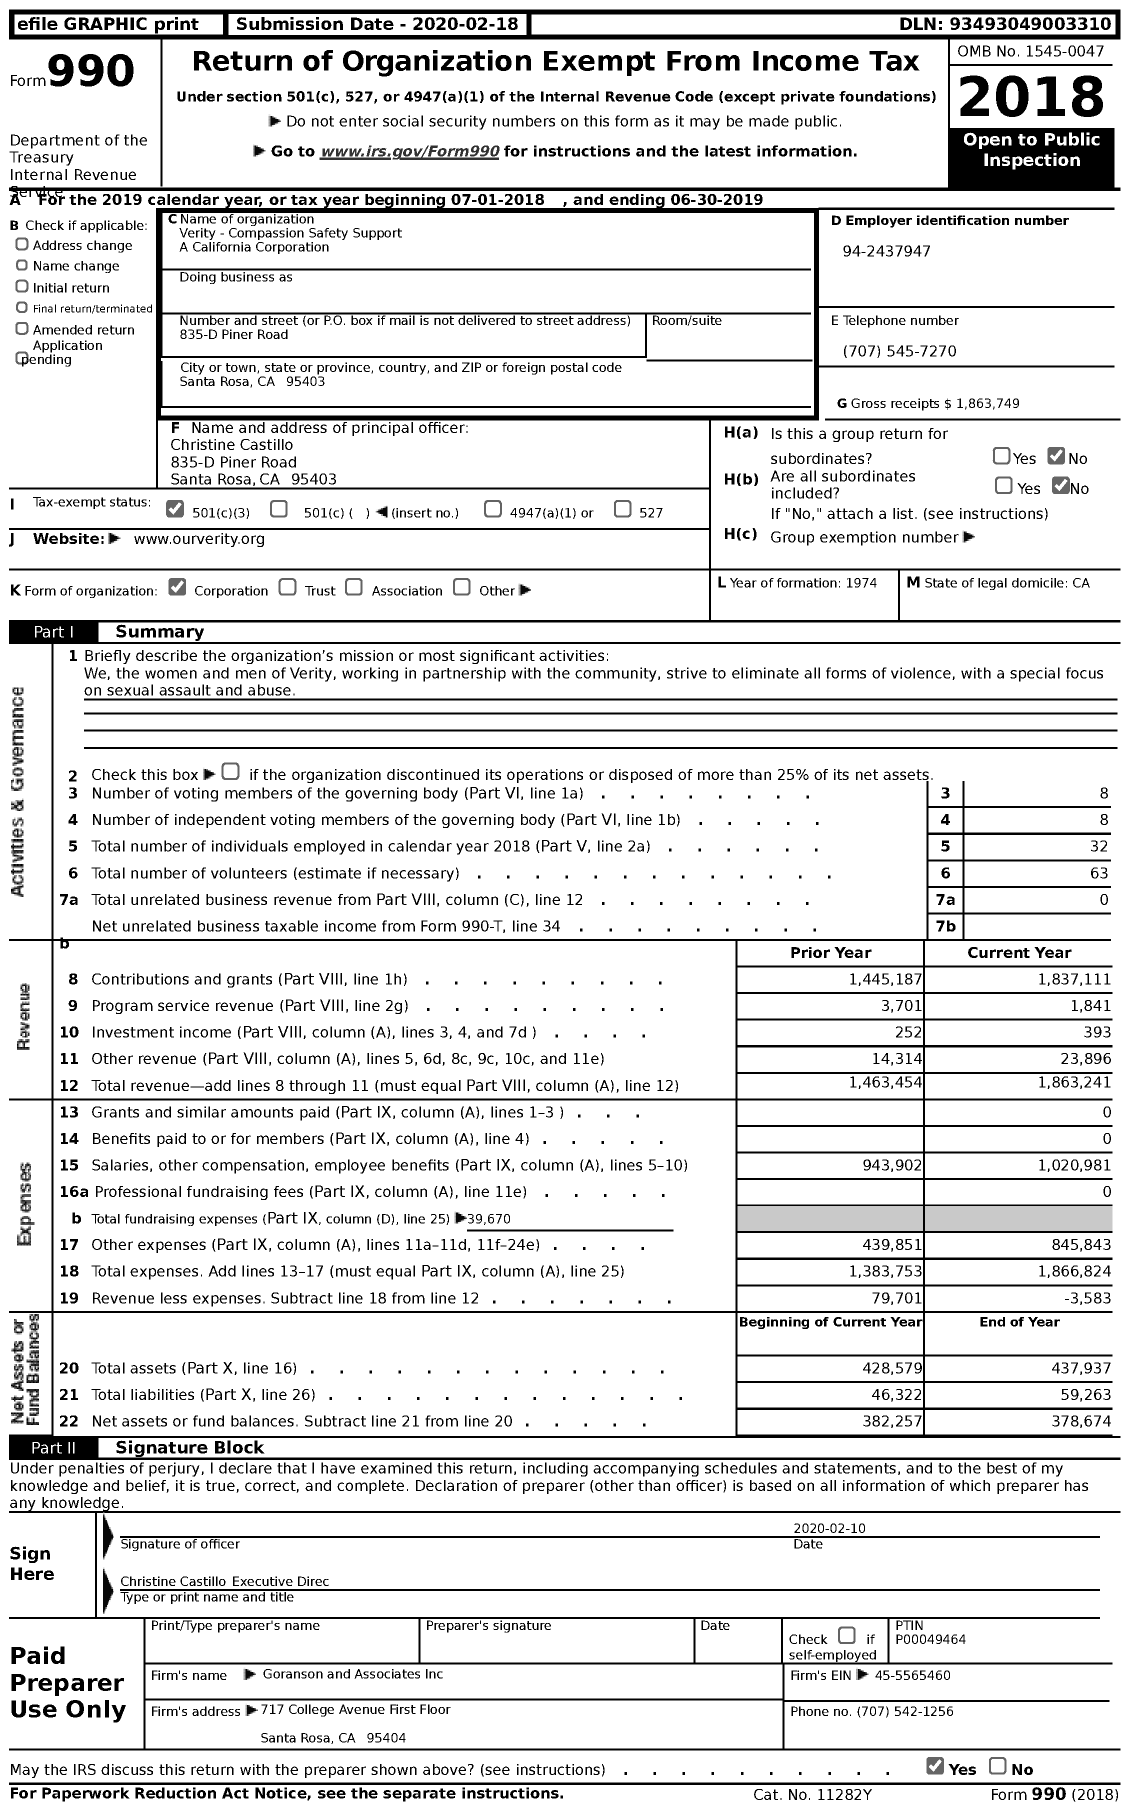 Image of first page of 2018 Form 990 for Verity - Compassion Safety Support A California Corporation